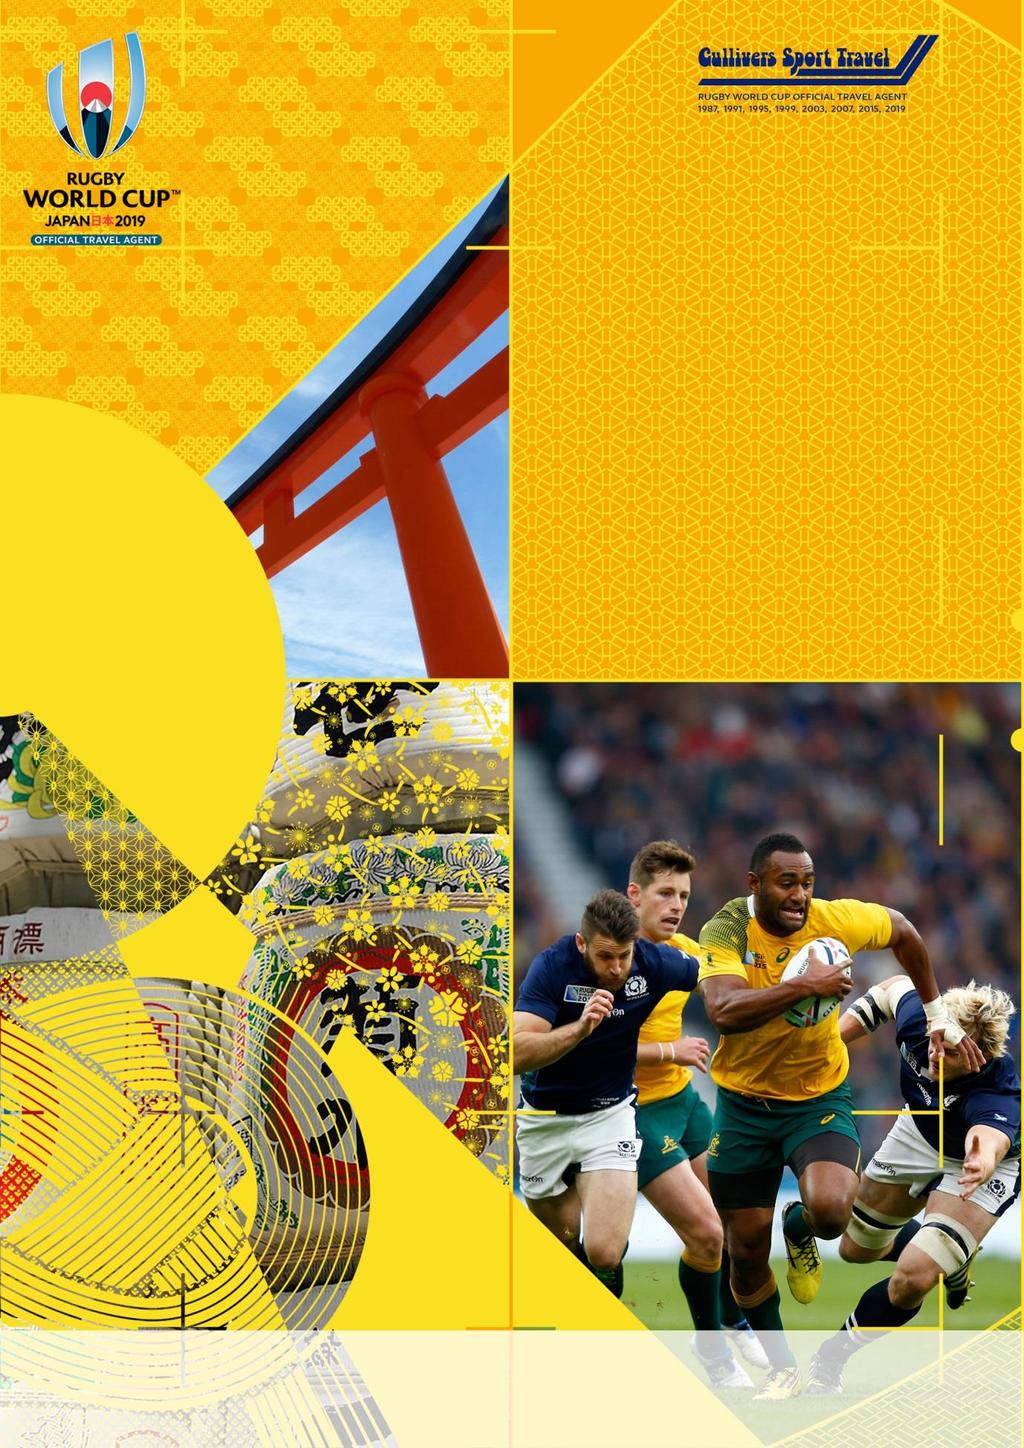 RUGBY WORLD CUP 2019 The Japan Culinary Experience with Adam Liaw Pools Tour 19 SEP 01 OCT FEATURED MATCHES NZ v Sth Africa International Stadium Yokohama Ireland v Scotland International Stadium